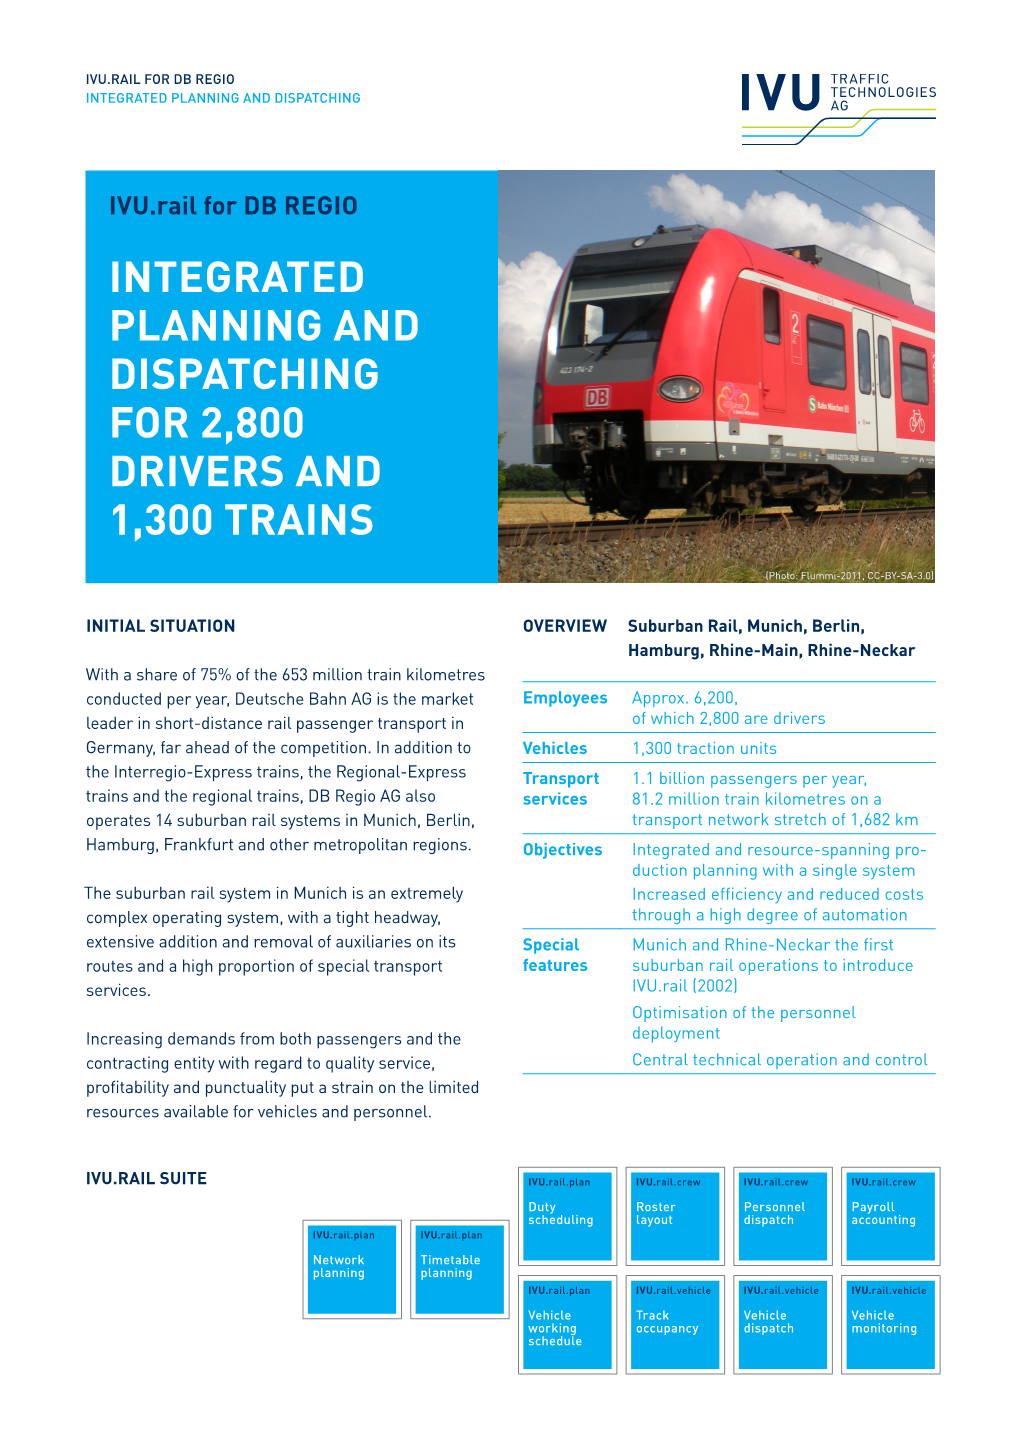 Ivu.Rail for Db Regio Integrated Planning and Dispatching